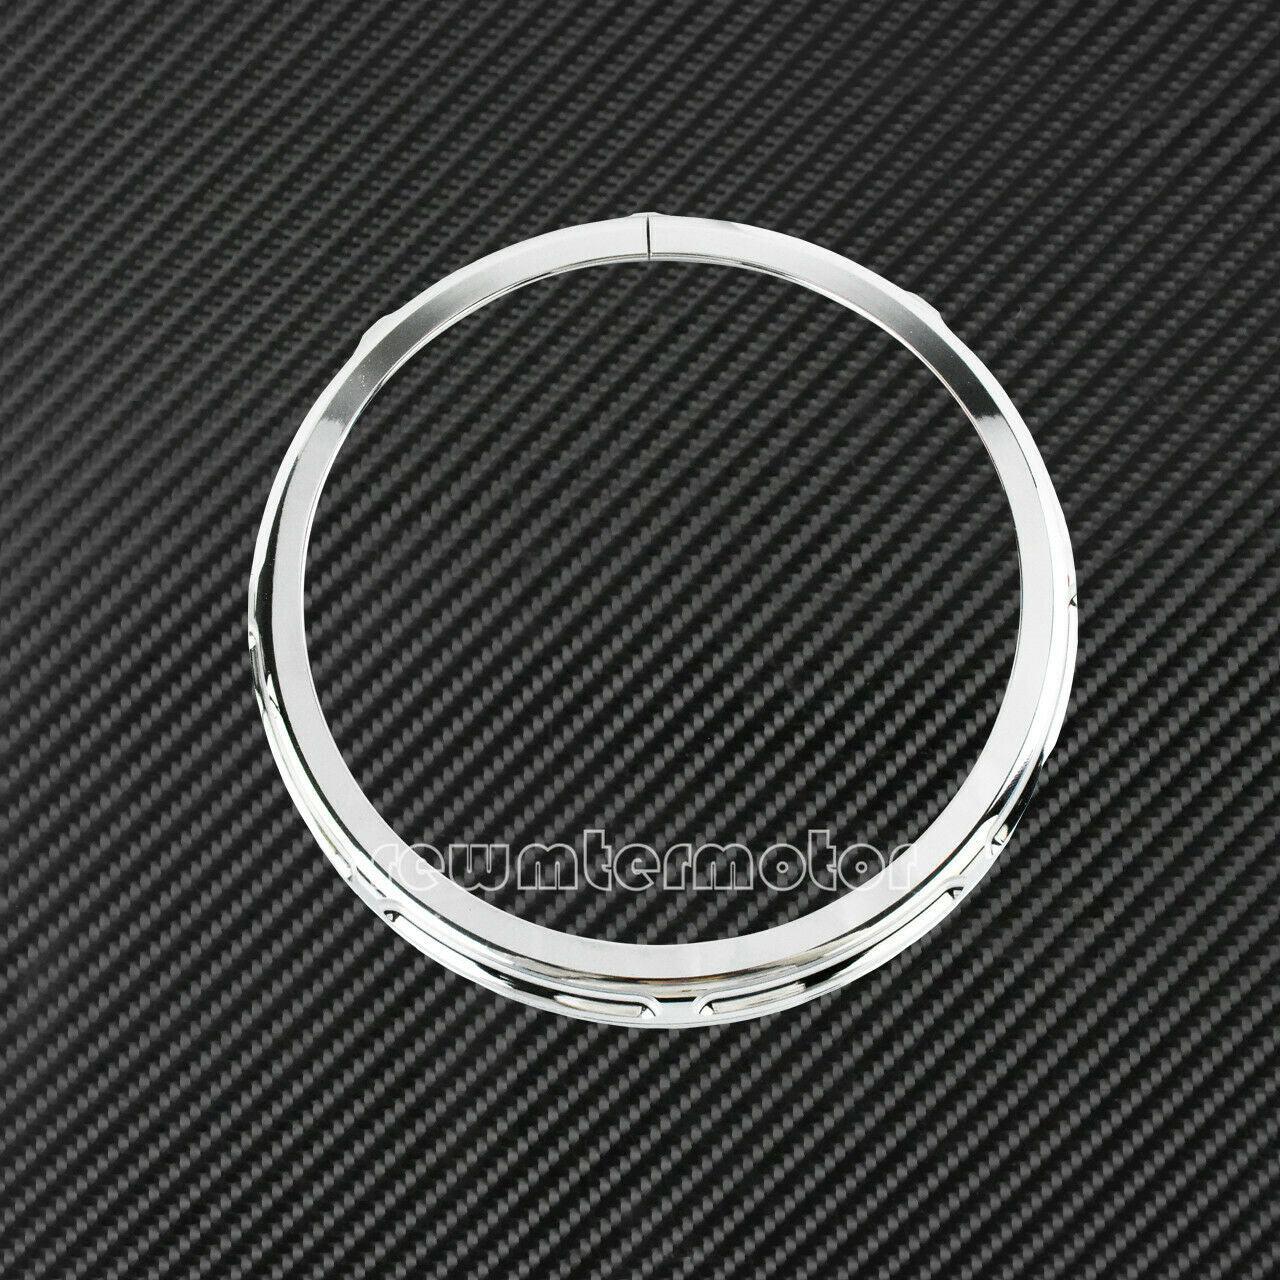 Chrome 7'' Burst Headlight Trim Ring Fit For Harley Touring Road King Trike 2013 - Moto Life Products